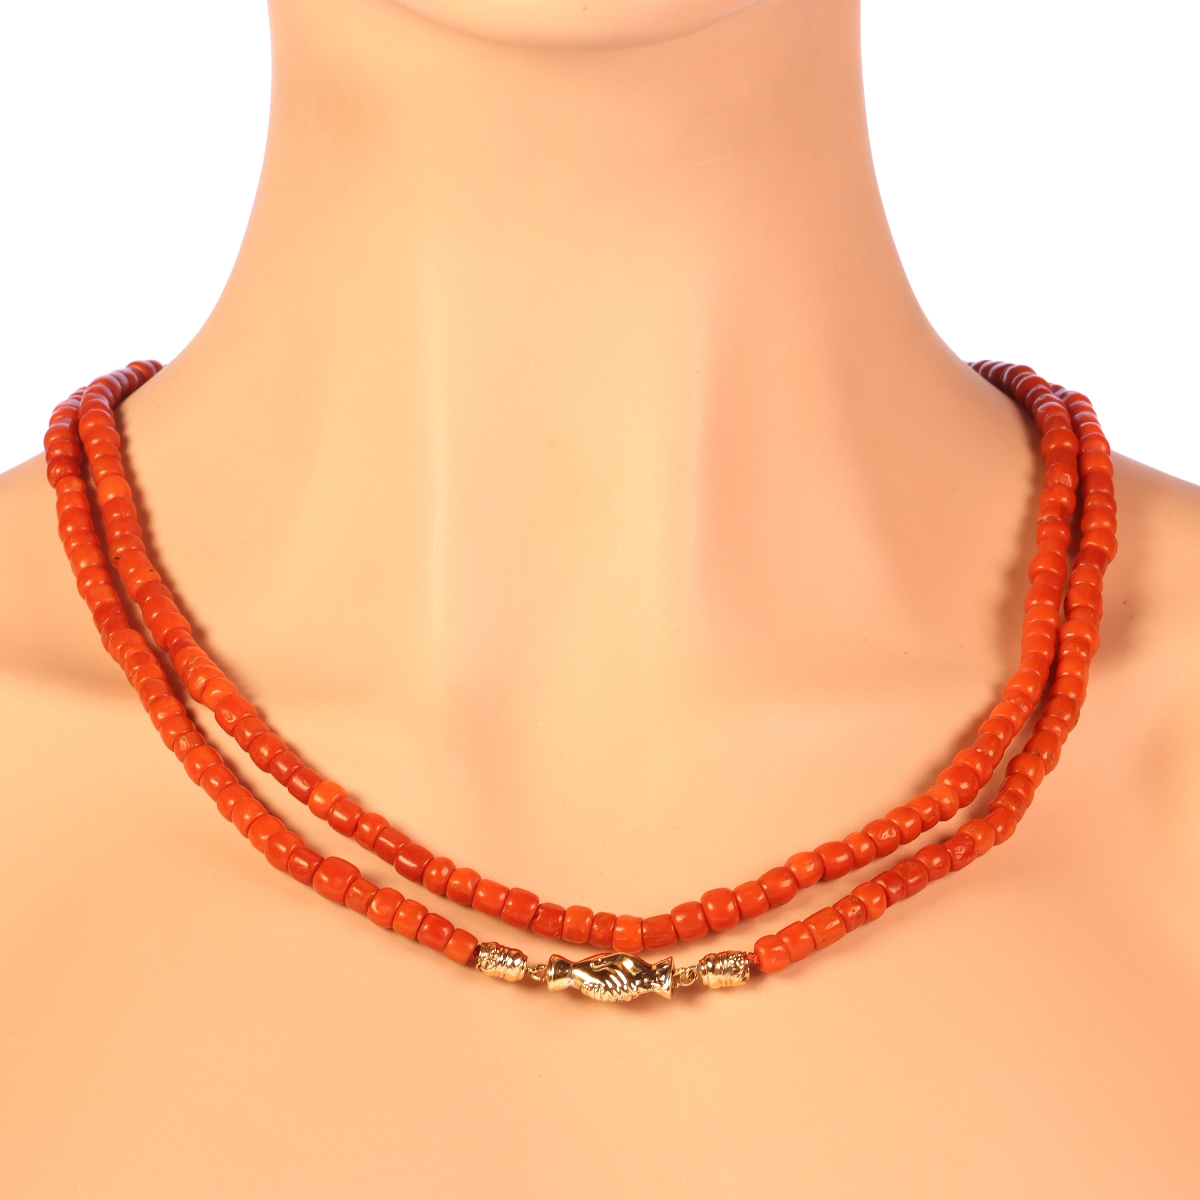 Victorian antique Dutch coral necklace with gold holding hands as clasp